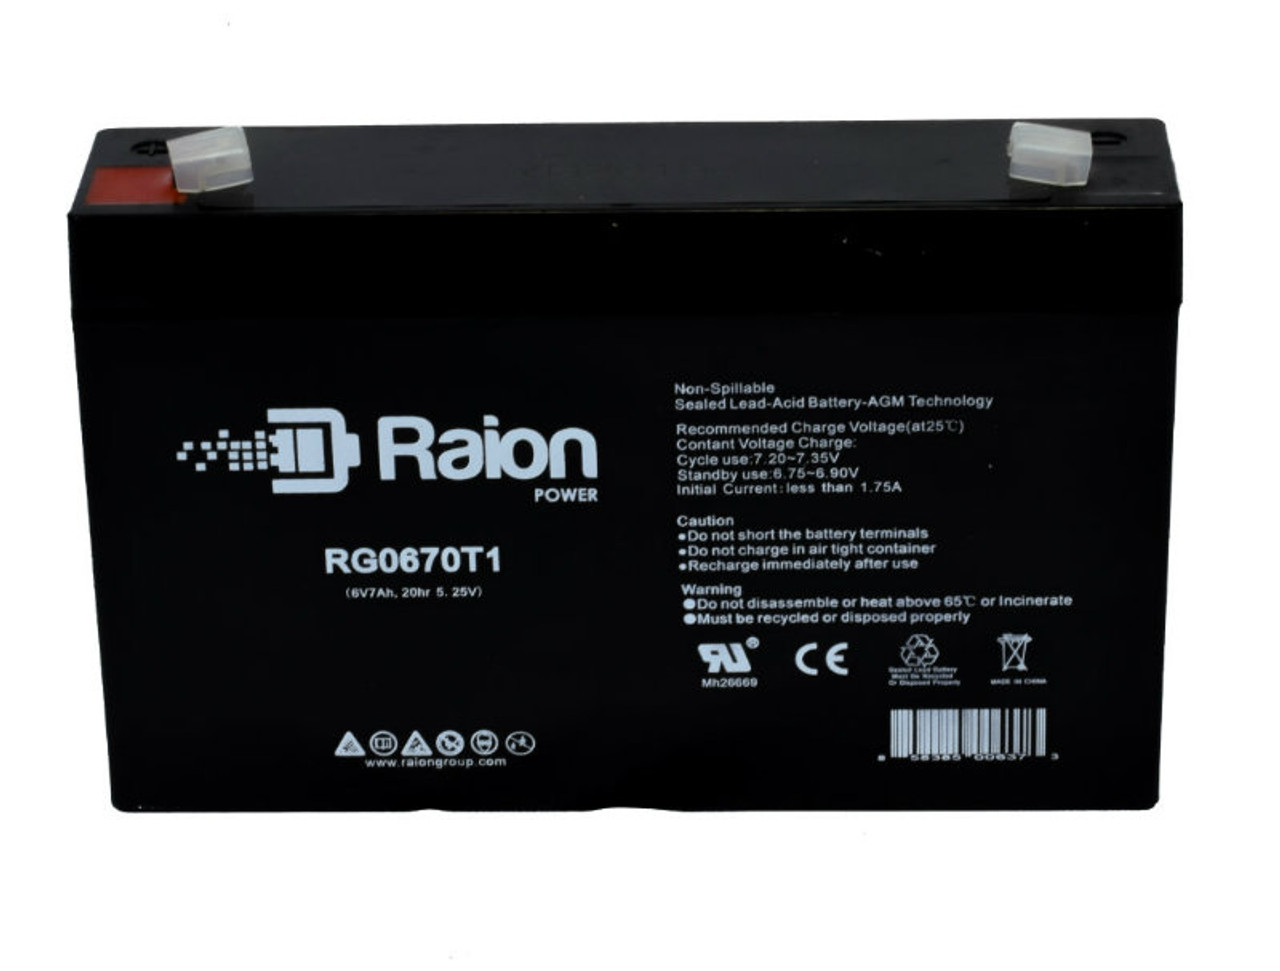 Raion Power RG0670T1 Replacement Battery Cartridge for Pace Tech Inc. 911 STC MINIPACK ECG MONITOR